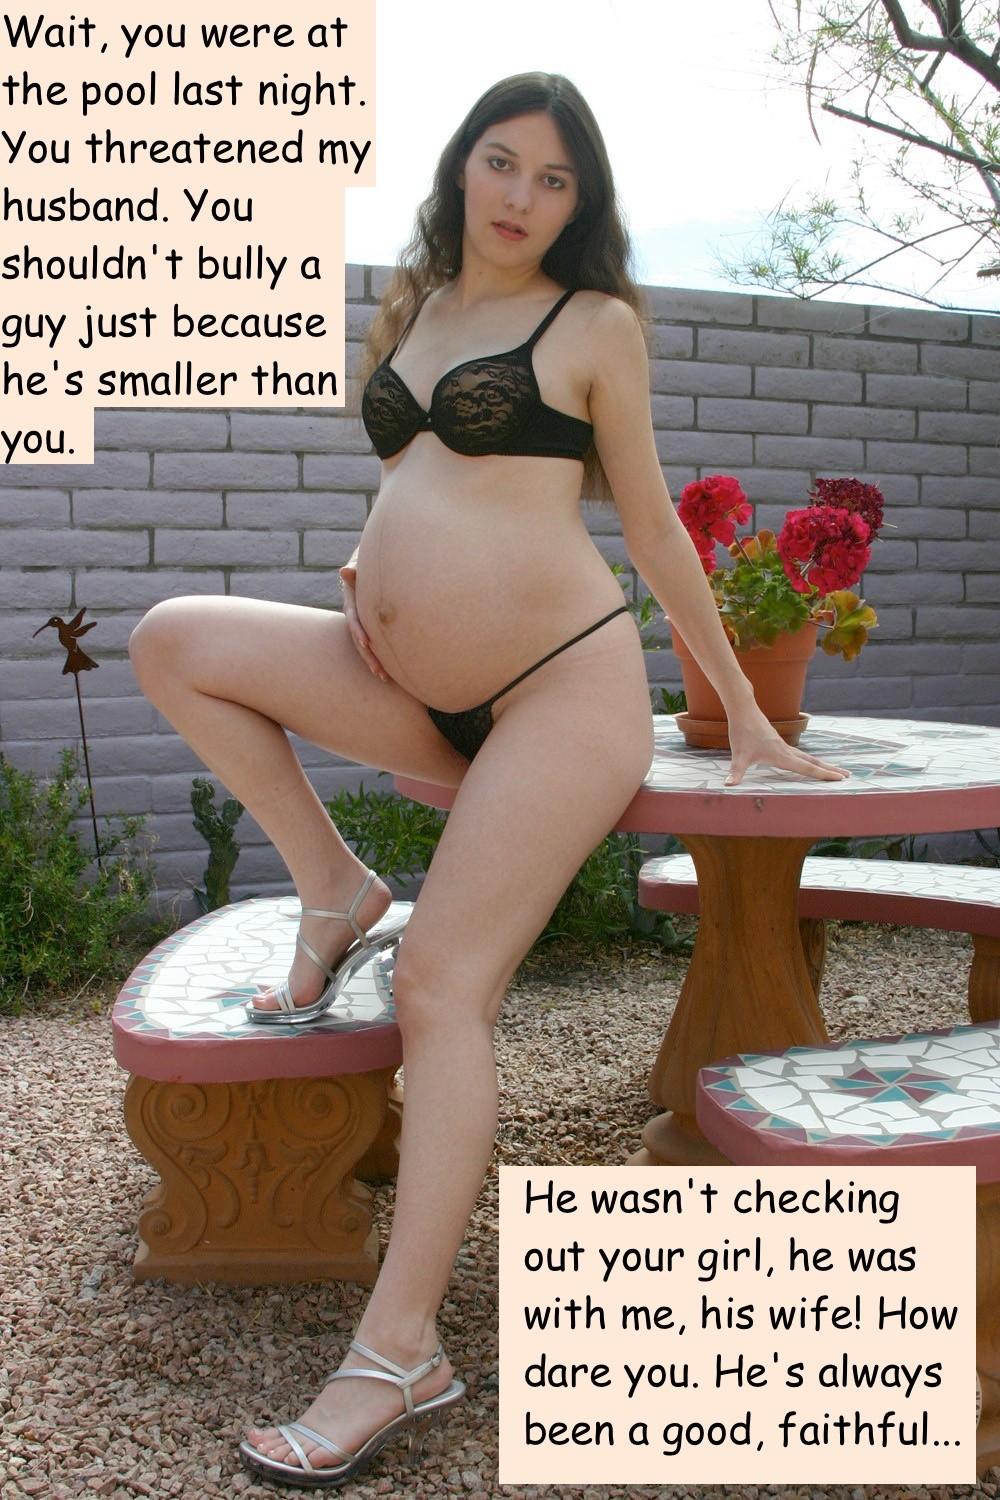 Pregnent interracial sex story image